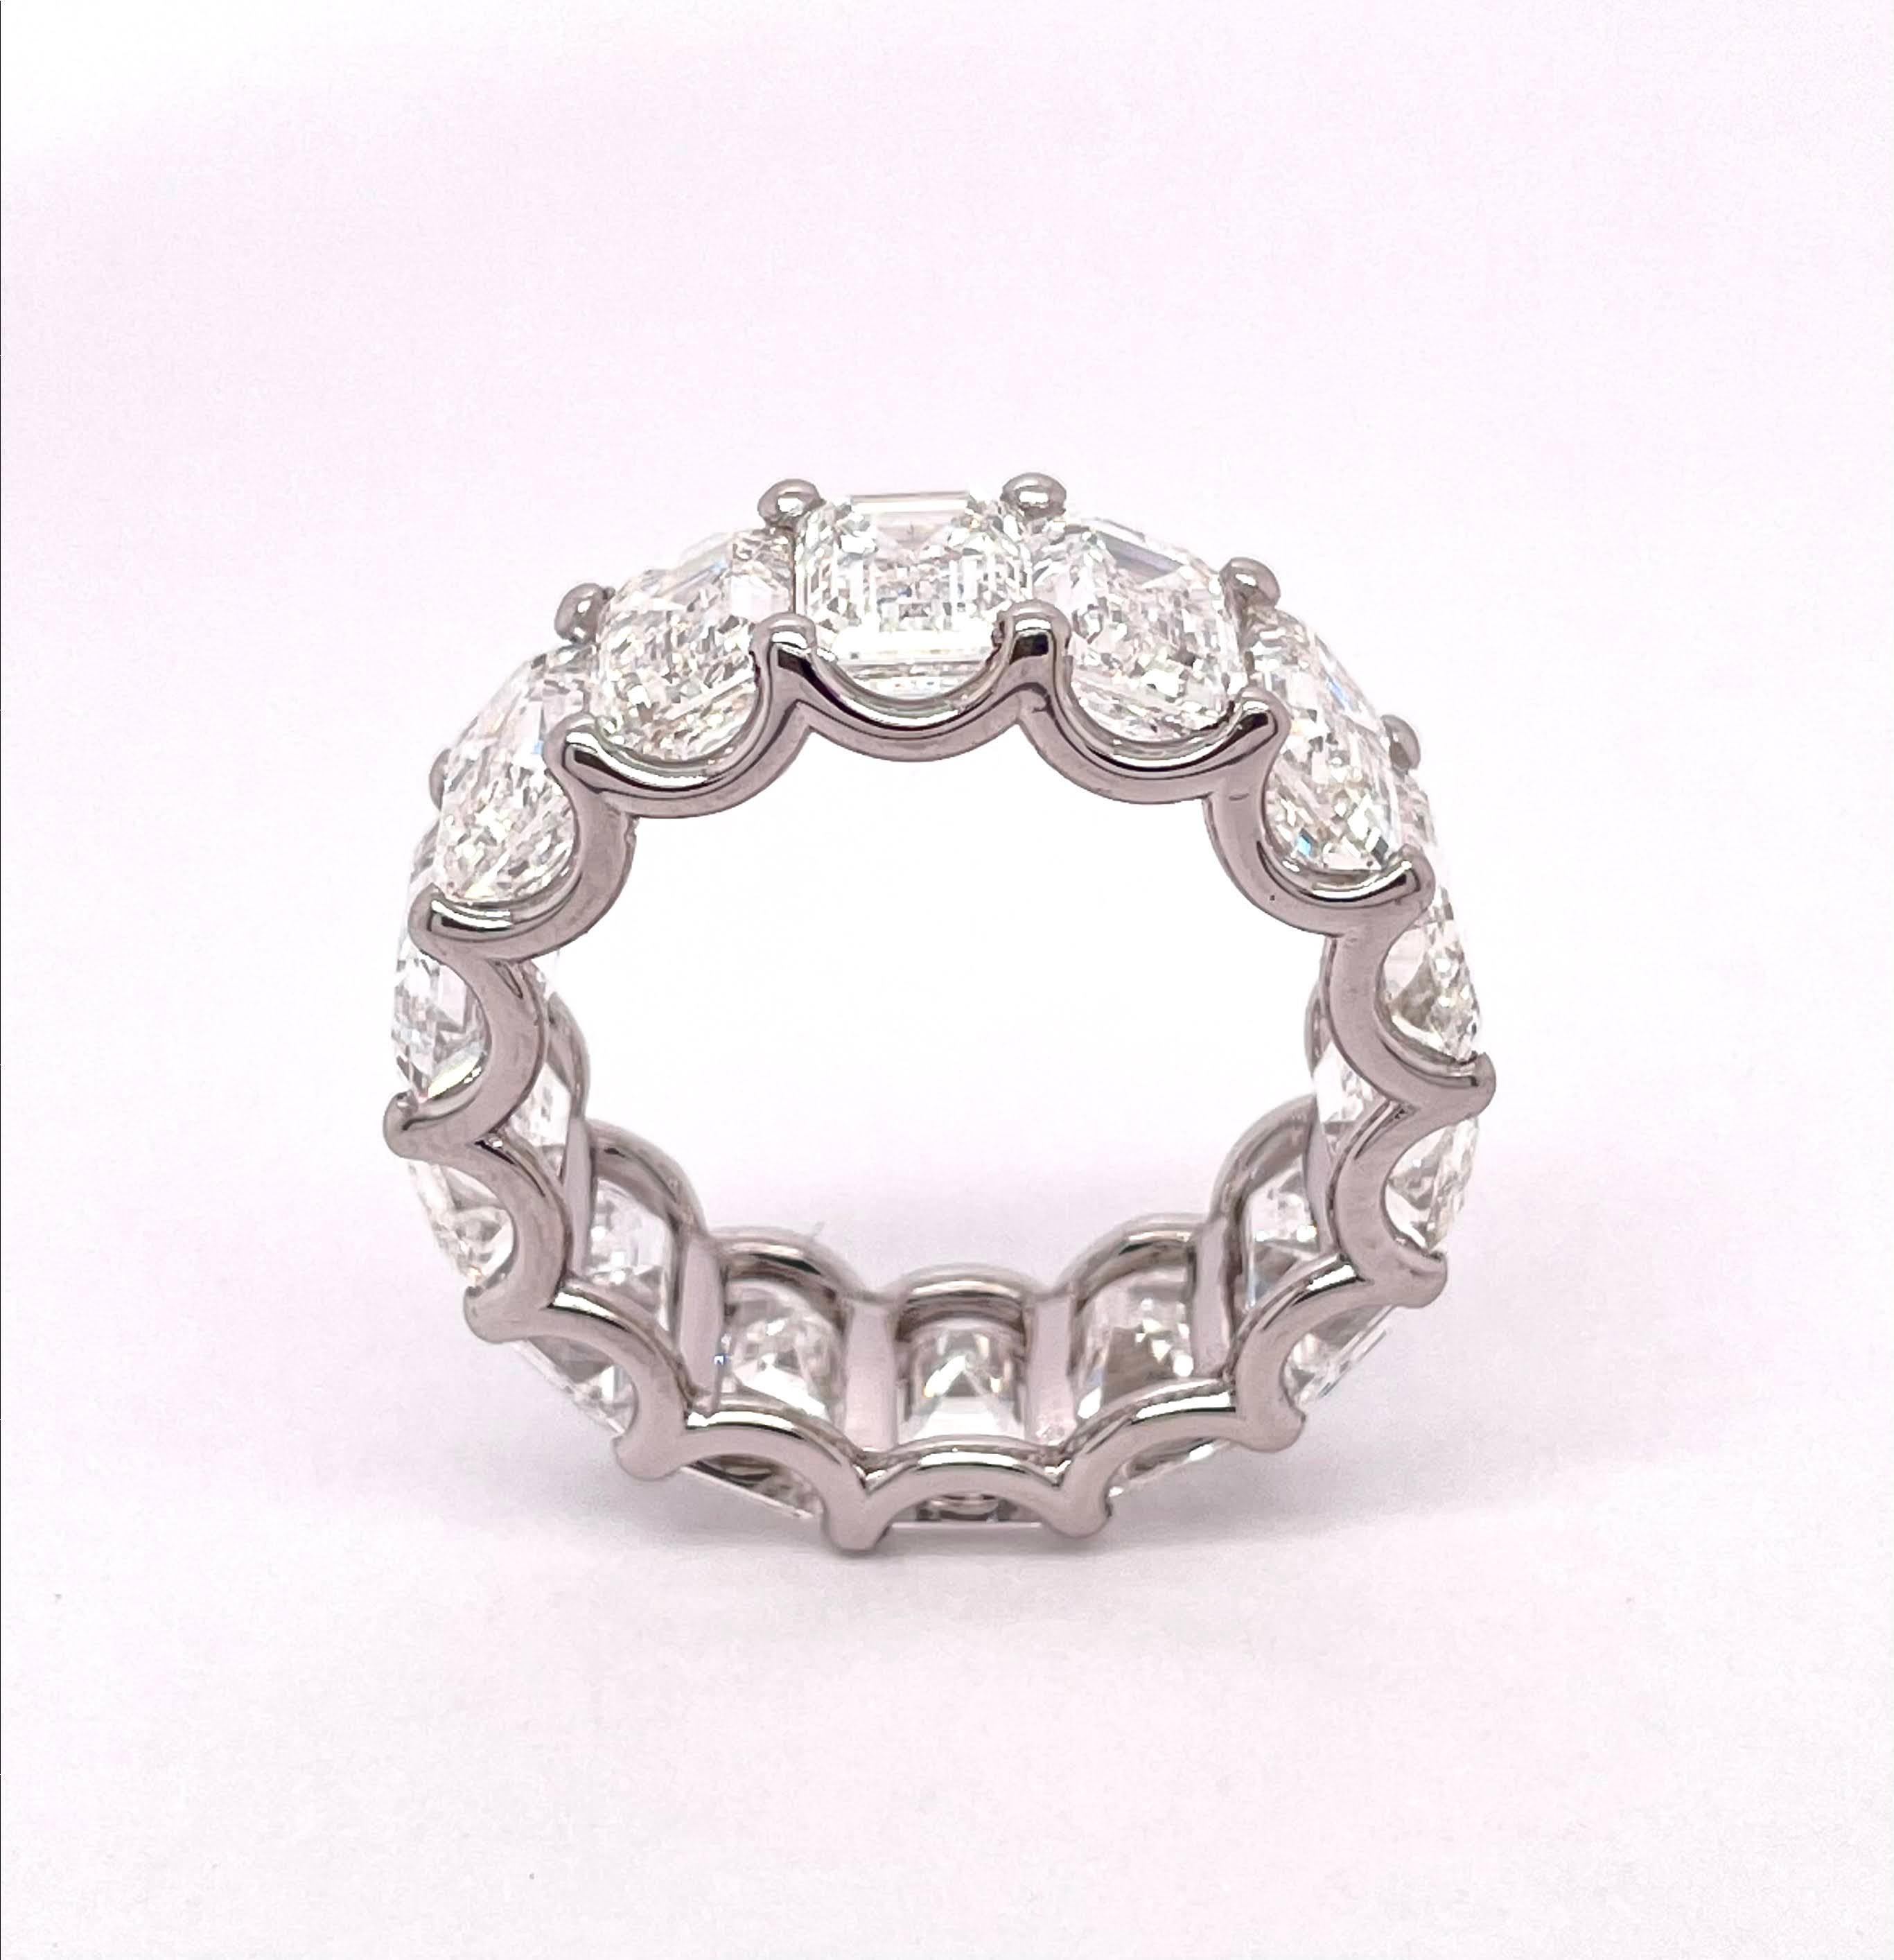 Classic Eternity Ring with 14.24 carats of 14 Emerald cut diamonds are all GIA certified. Our fine diamonds are well-picked and has D-G color, VS2-VVS1 clarity. These diamonds are beautifully mounted on a exquisite Platinum setting.
We custom any